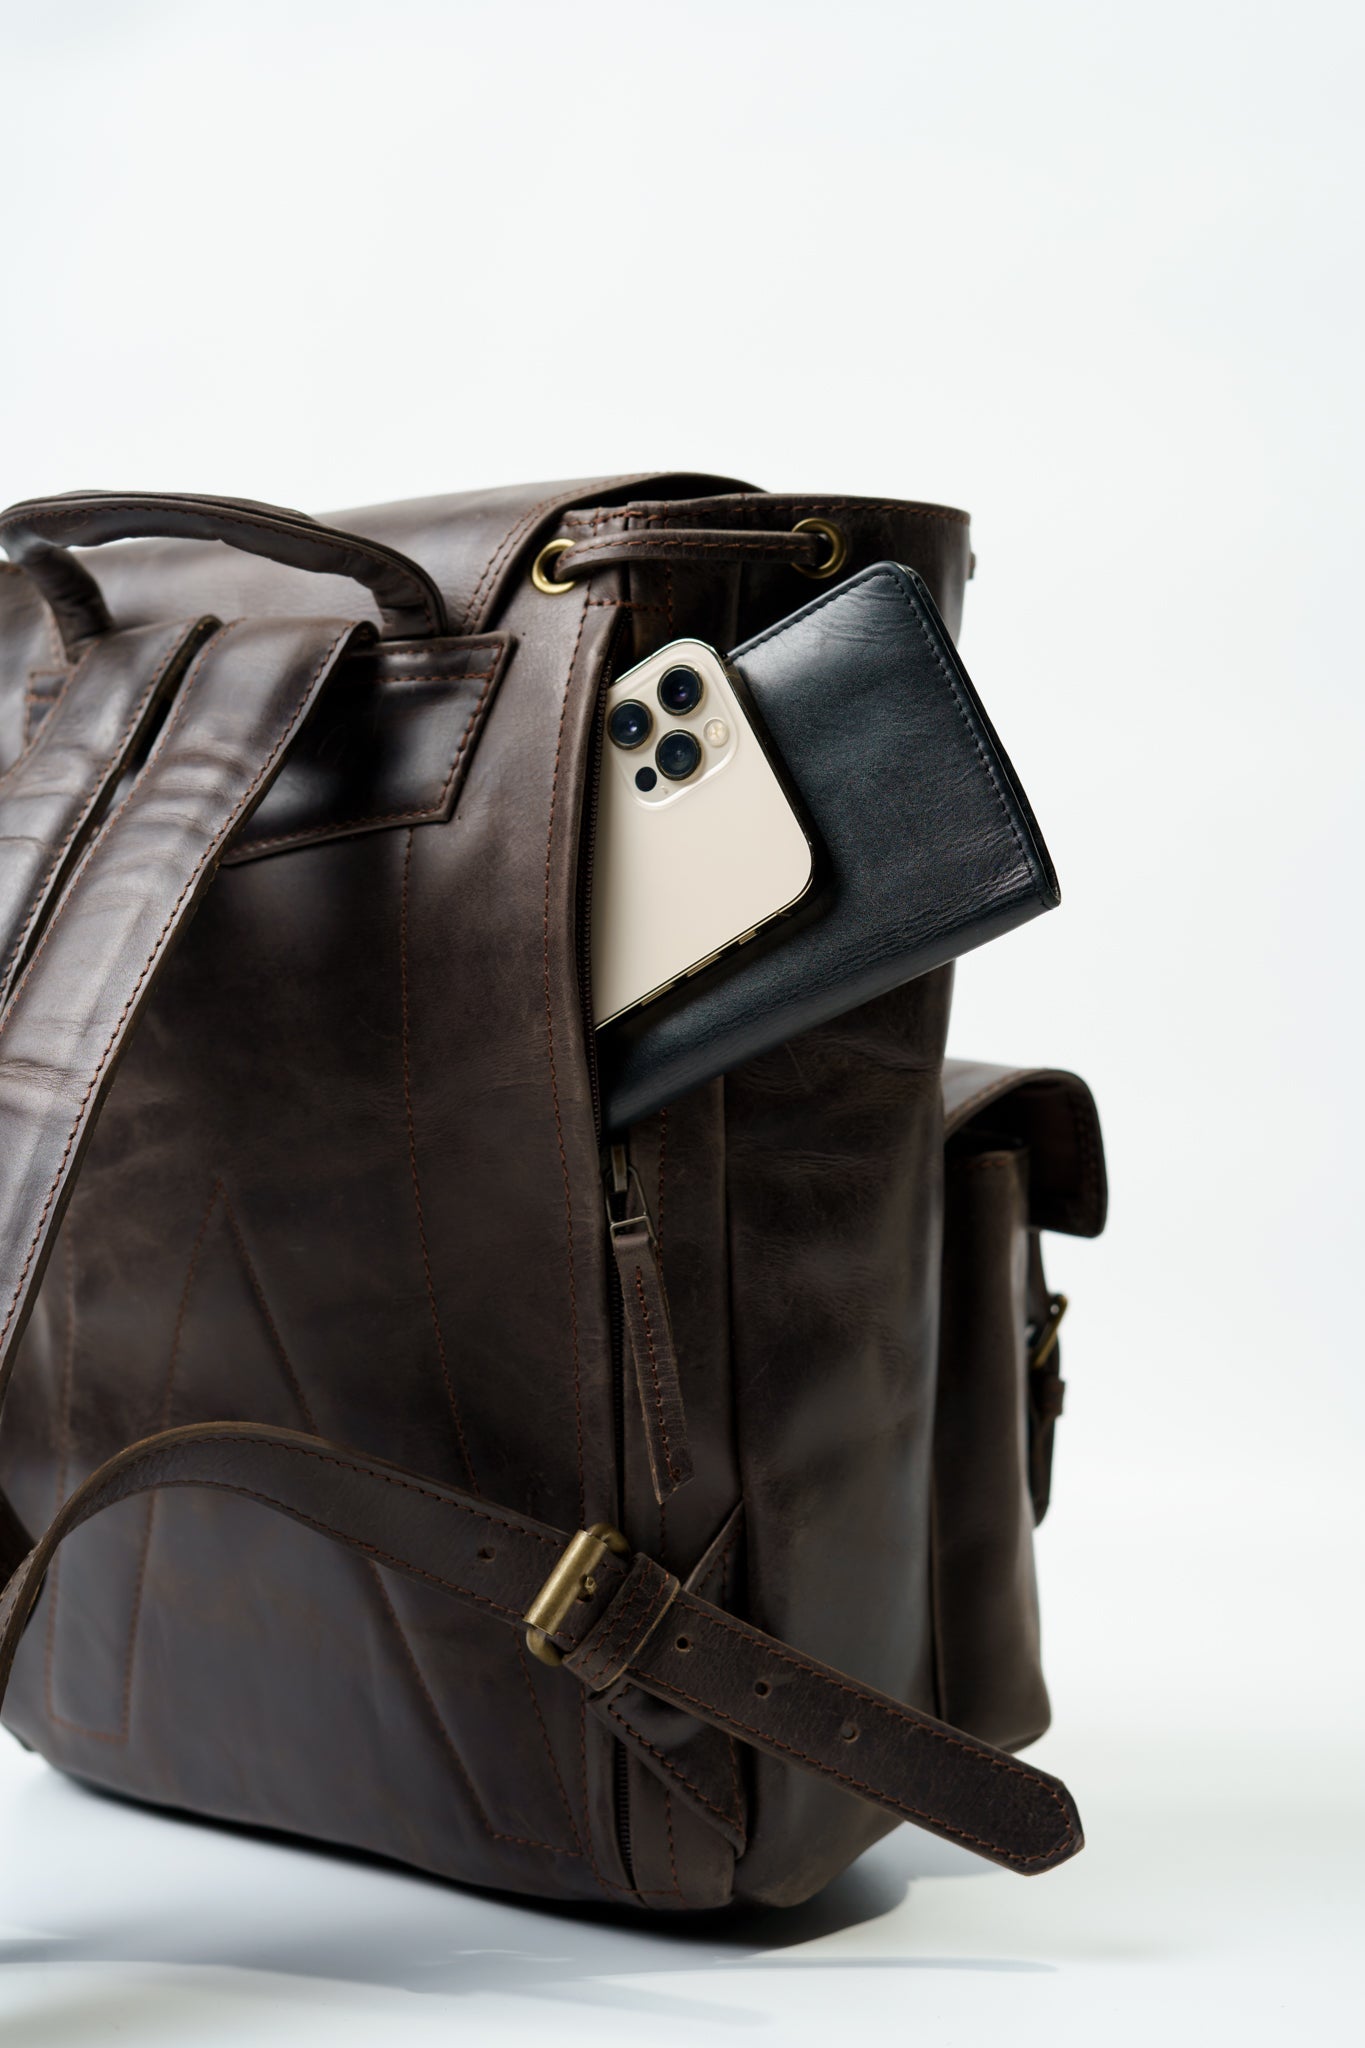 Rear view of Chamra's Utility Brown Backpack showcasing a hidden compartment behind the shoulder straps, fit to carry wallets, phones, passports, or other similar sized items.